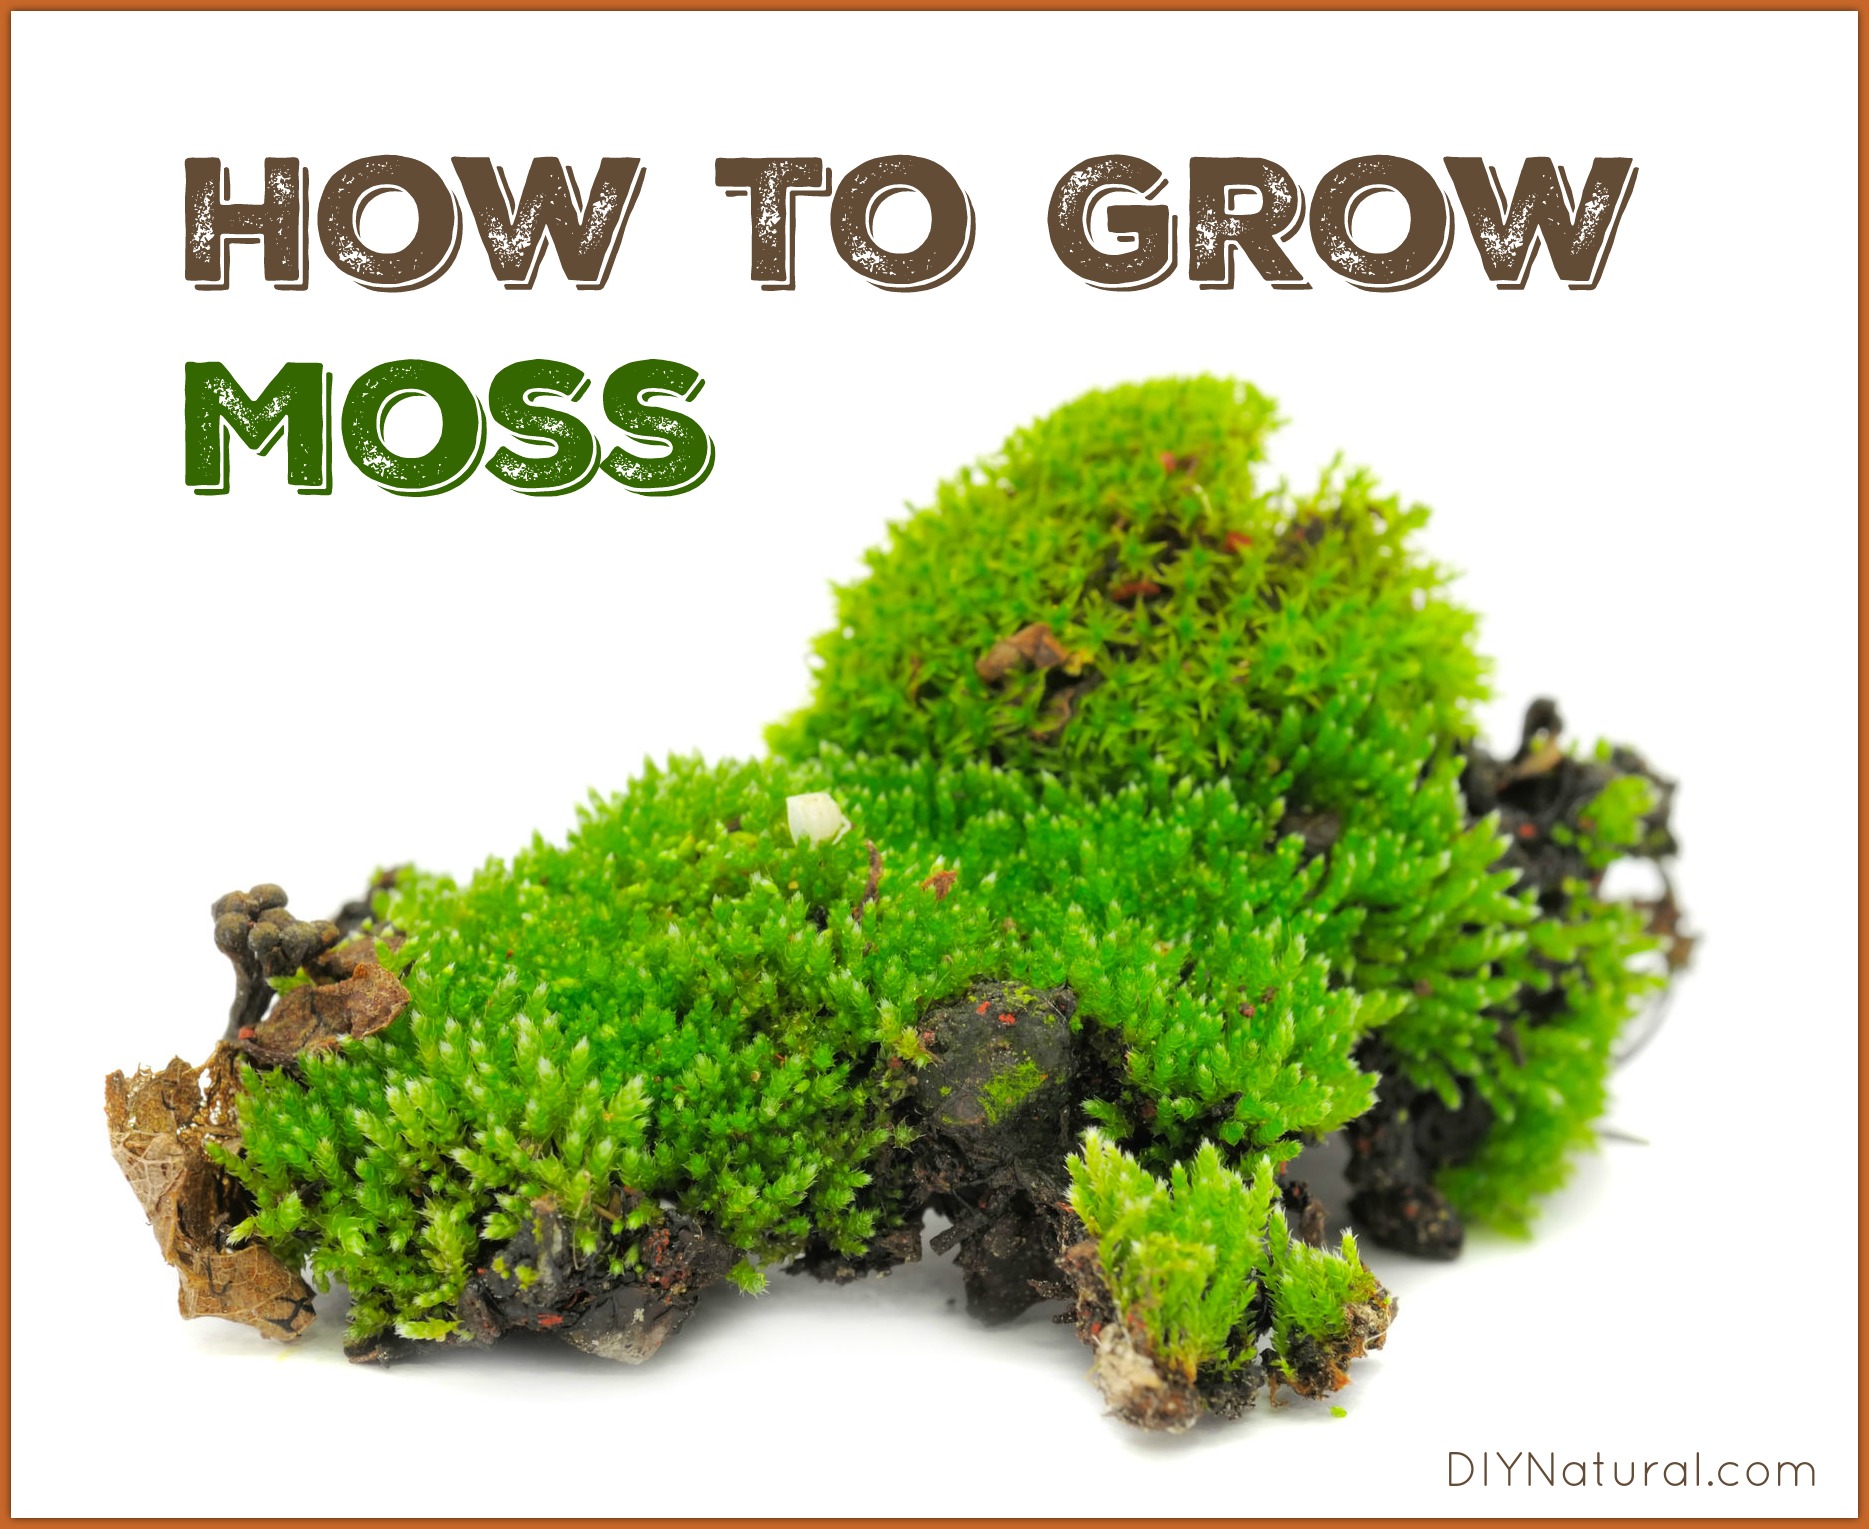 How To Grow Moss: A Simple and Fun Project